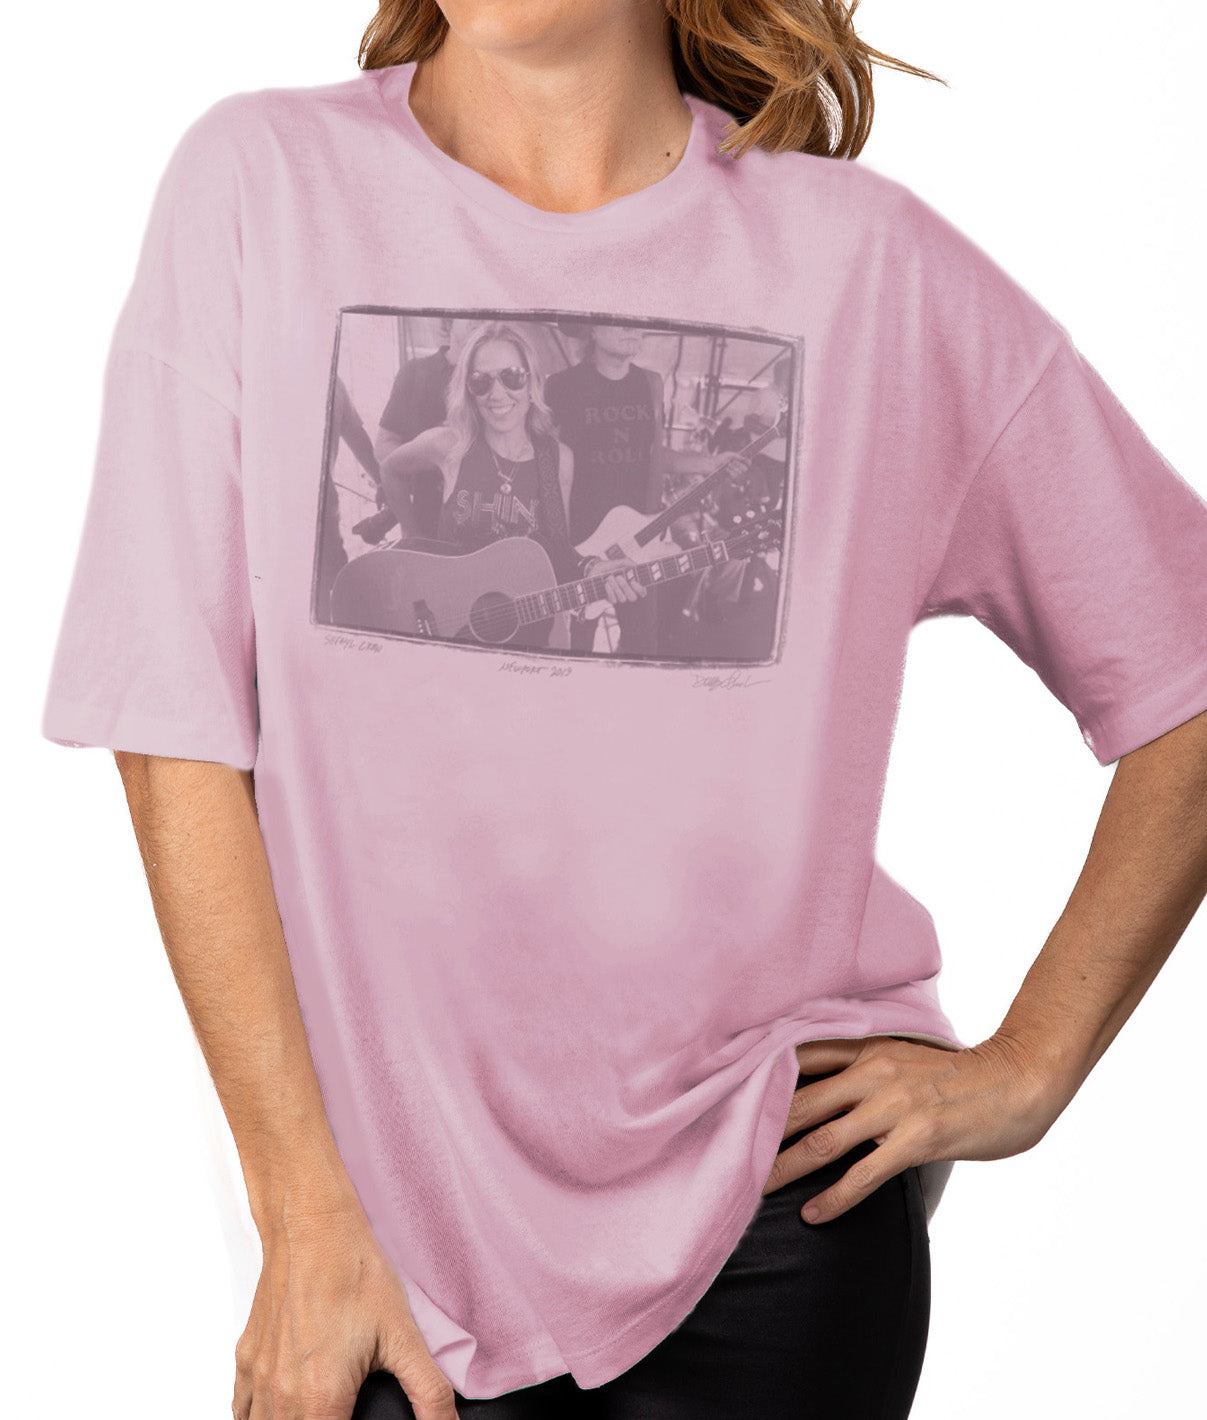 Sheryl Crow (Women's Dusty Rose Oversize Relaxed Tee)